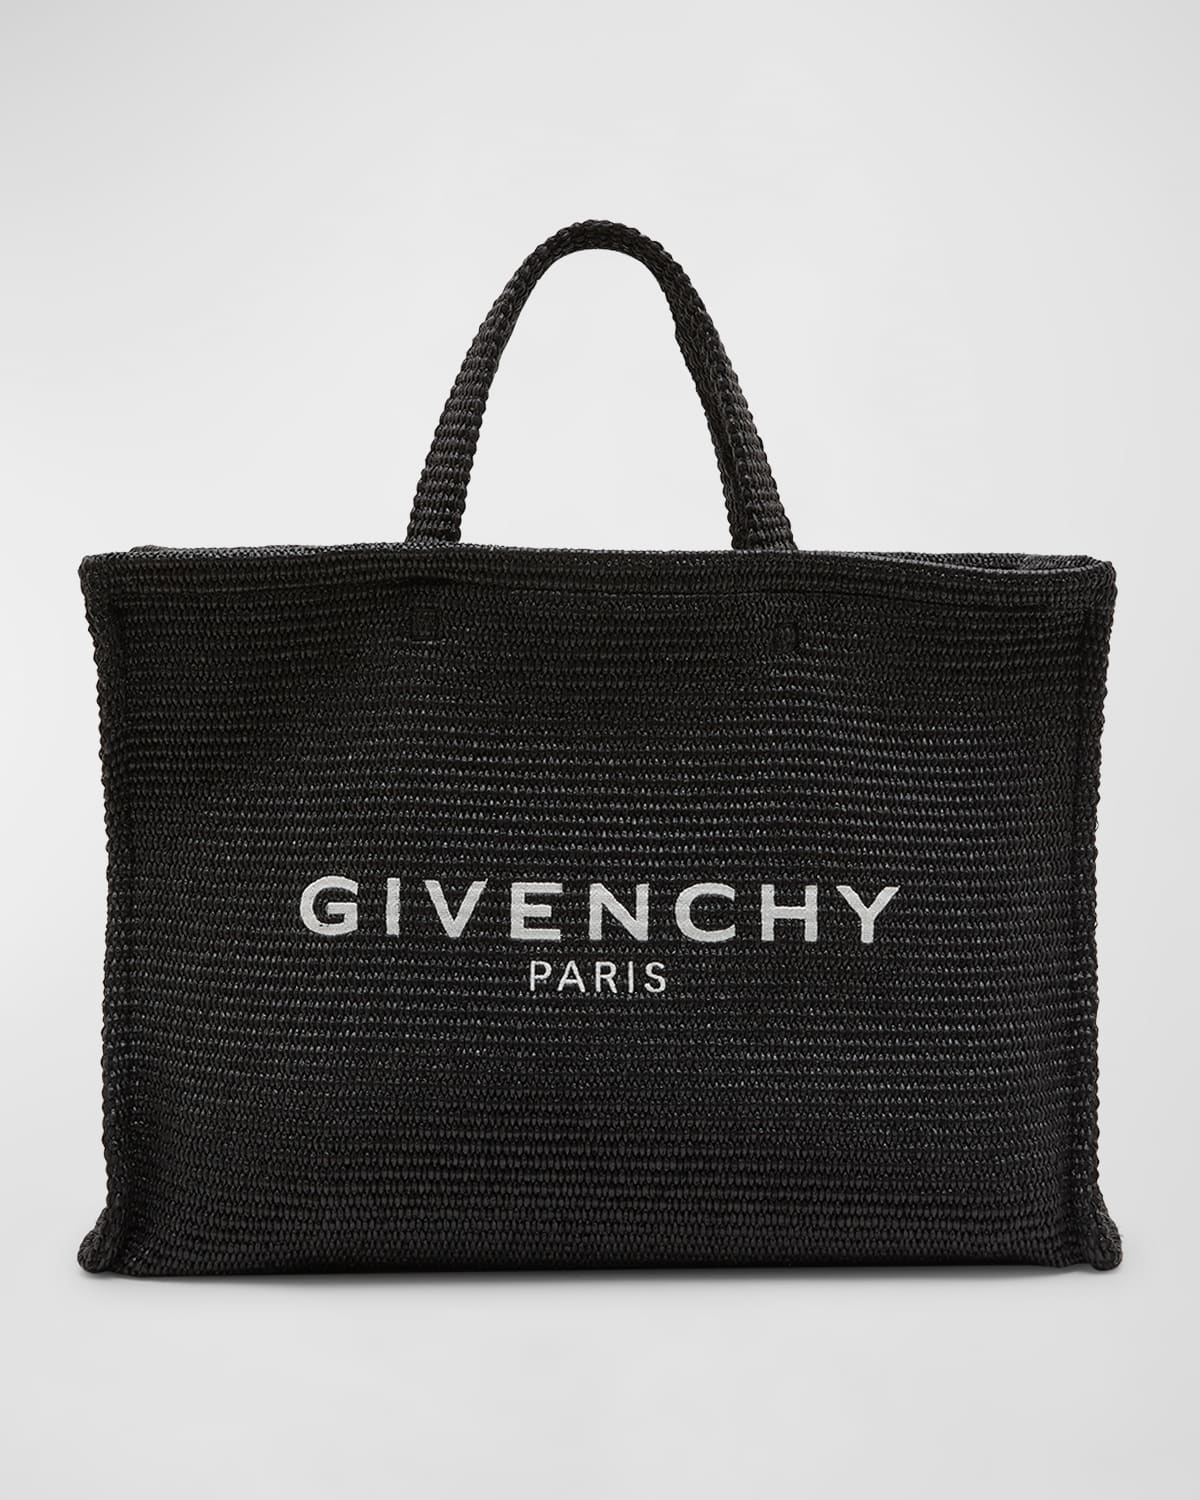 GIVENCHY G-TOTE LARGE SHOPPING BAG IN RAFFIA